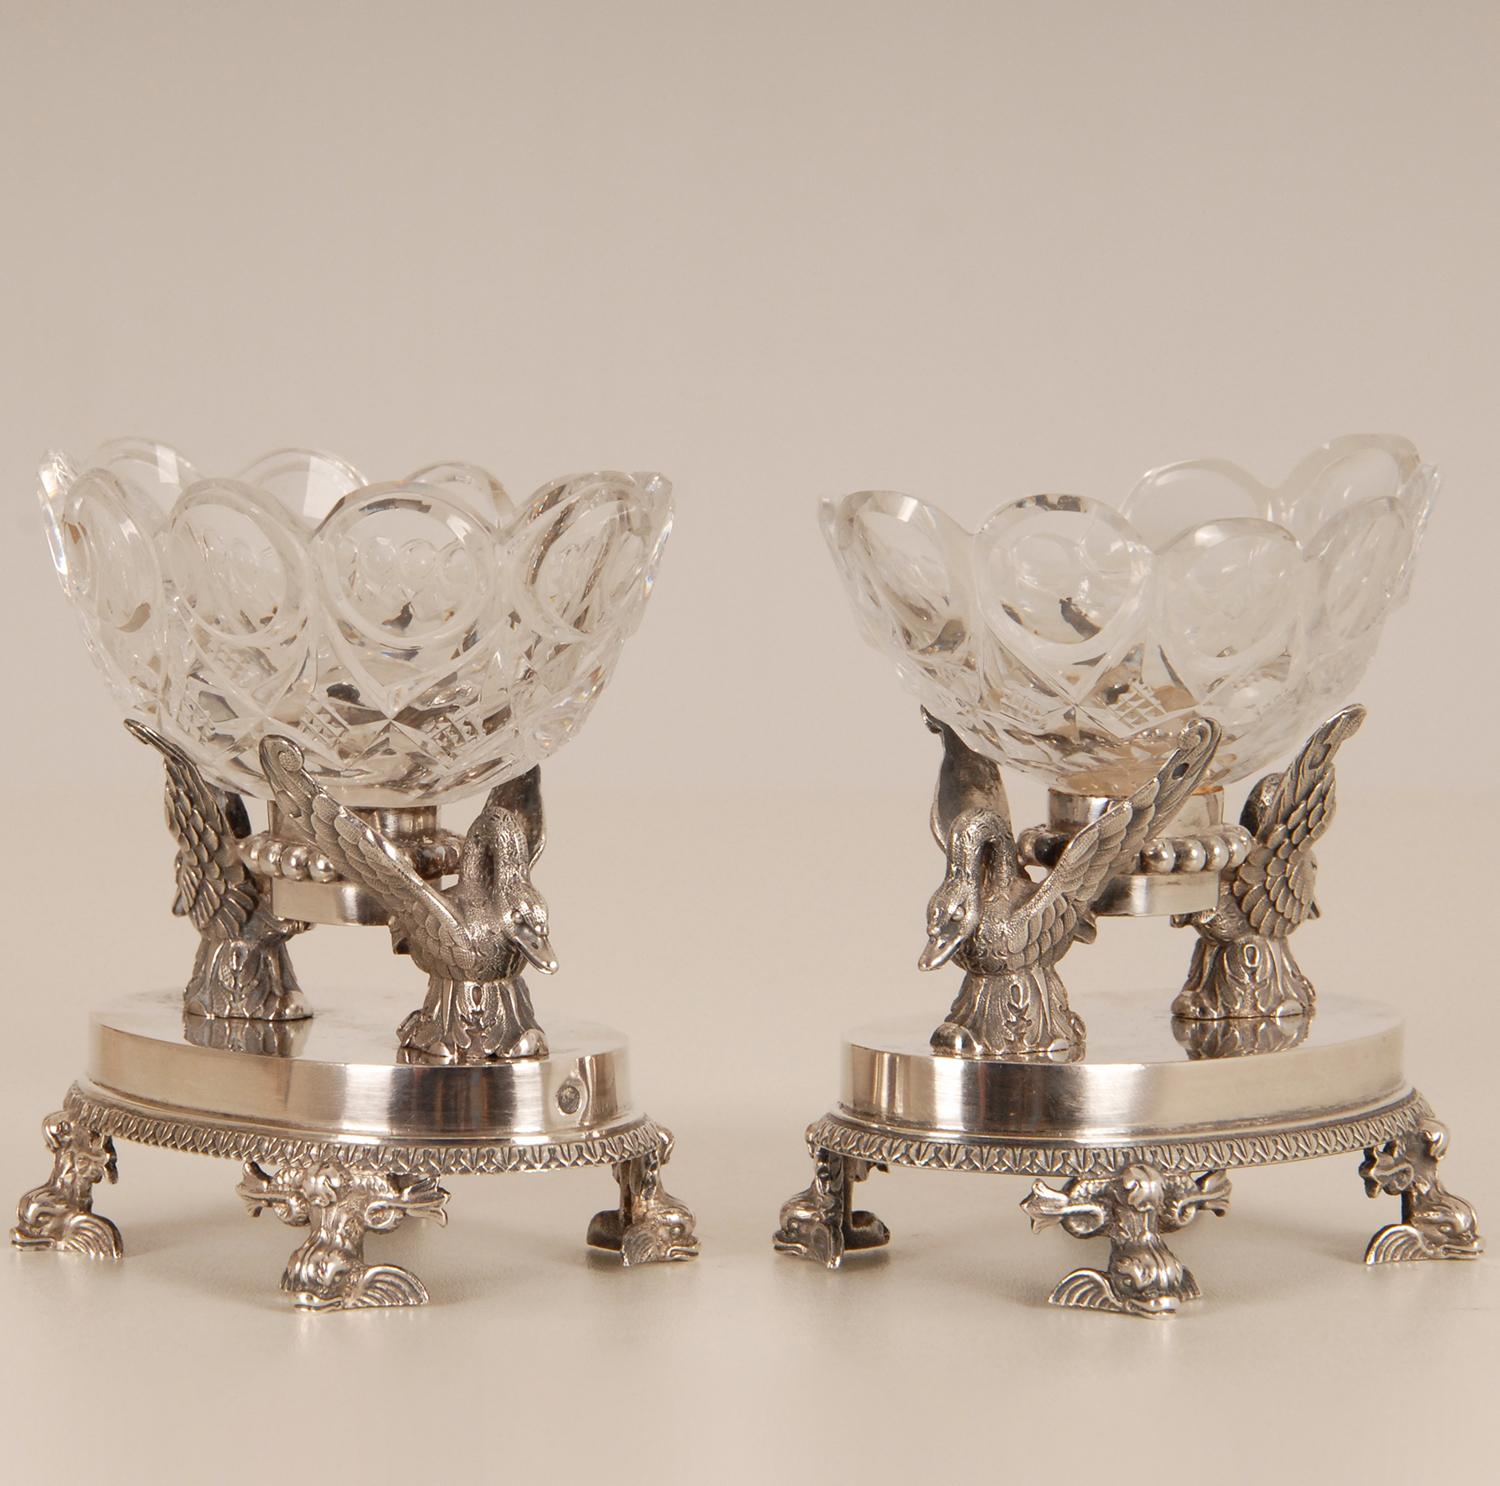 18th Century Empire Silver Baccarat Crystal Salt Cellars  F. Durand Napoleonic  In Good Condition For Sale In Wommelgem, VAN